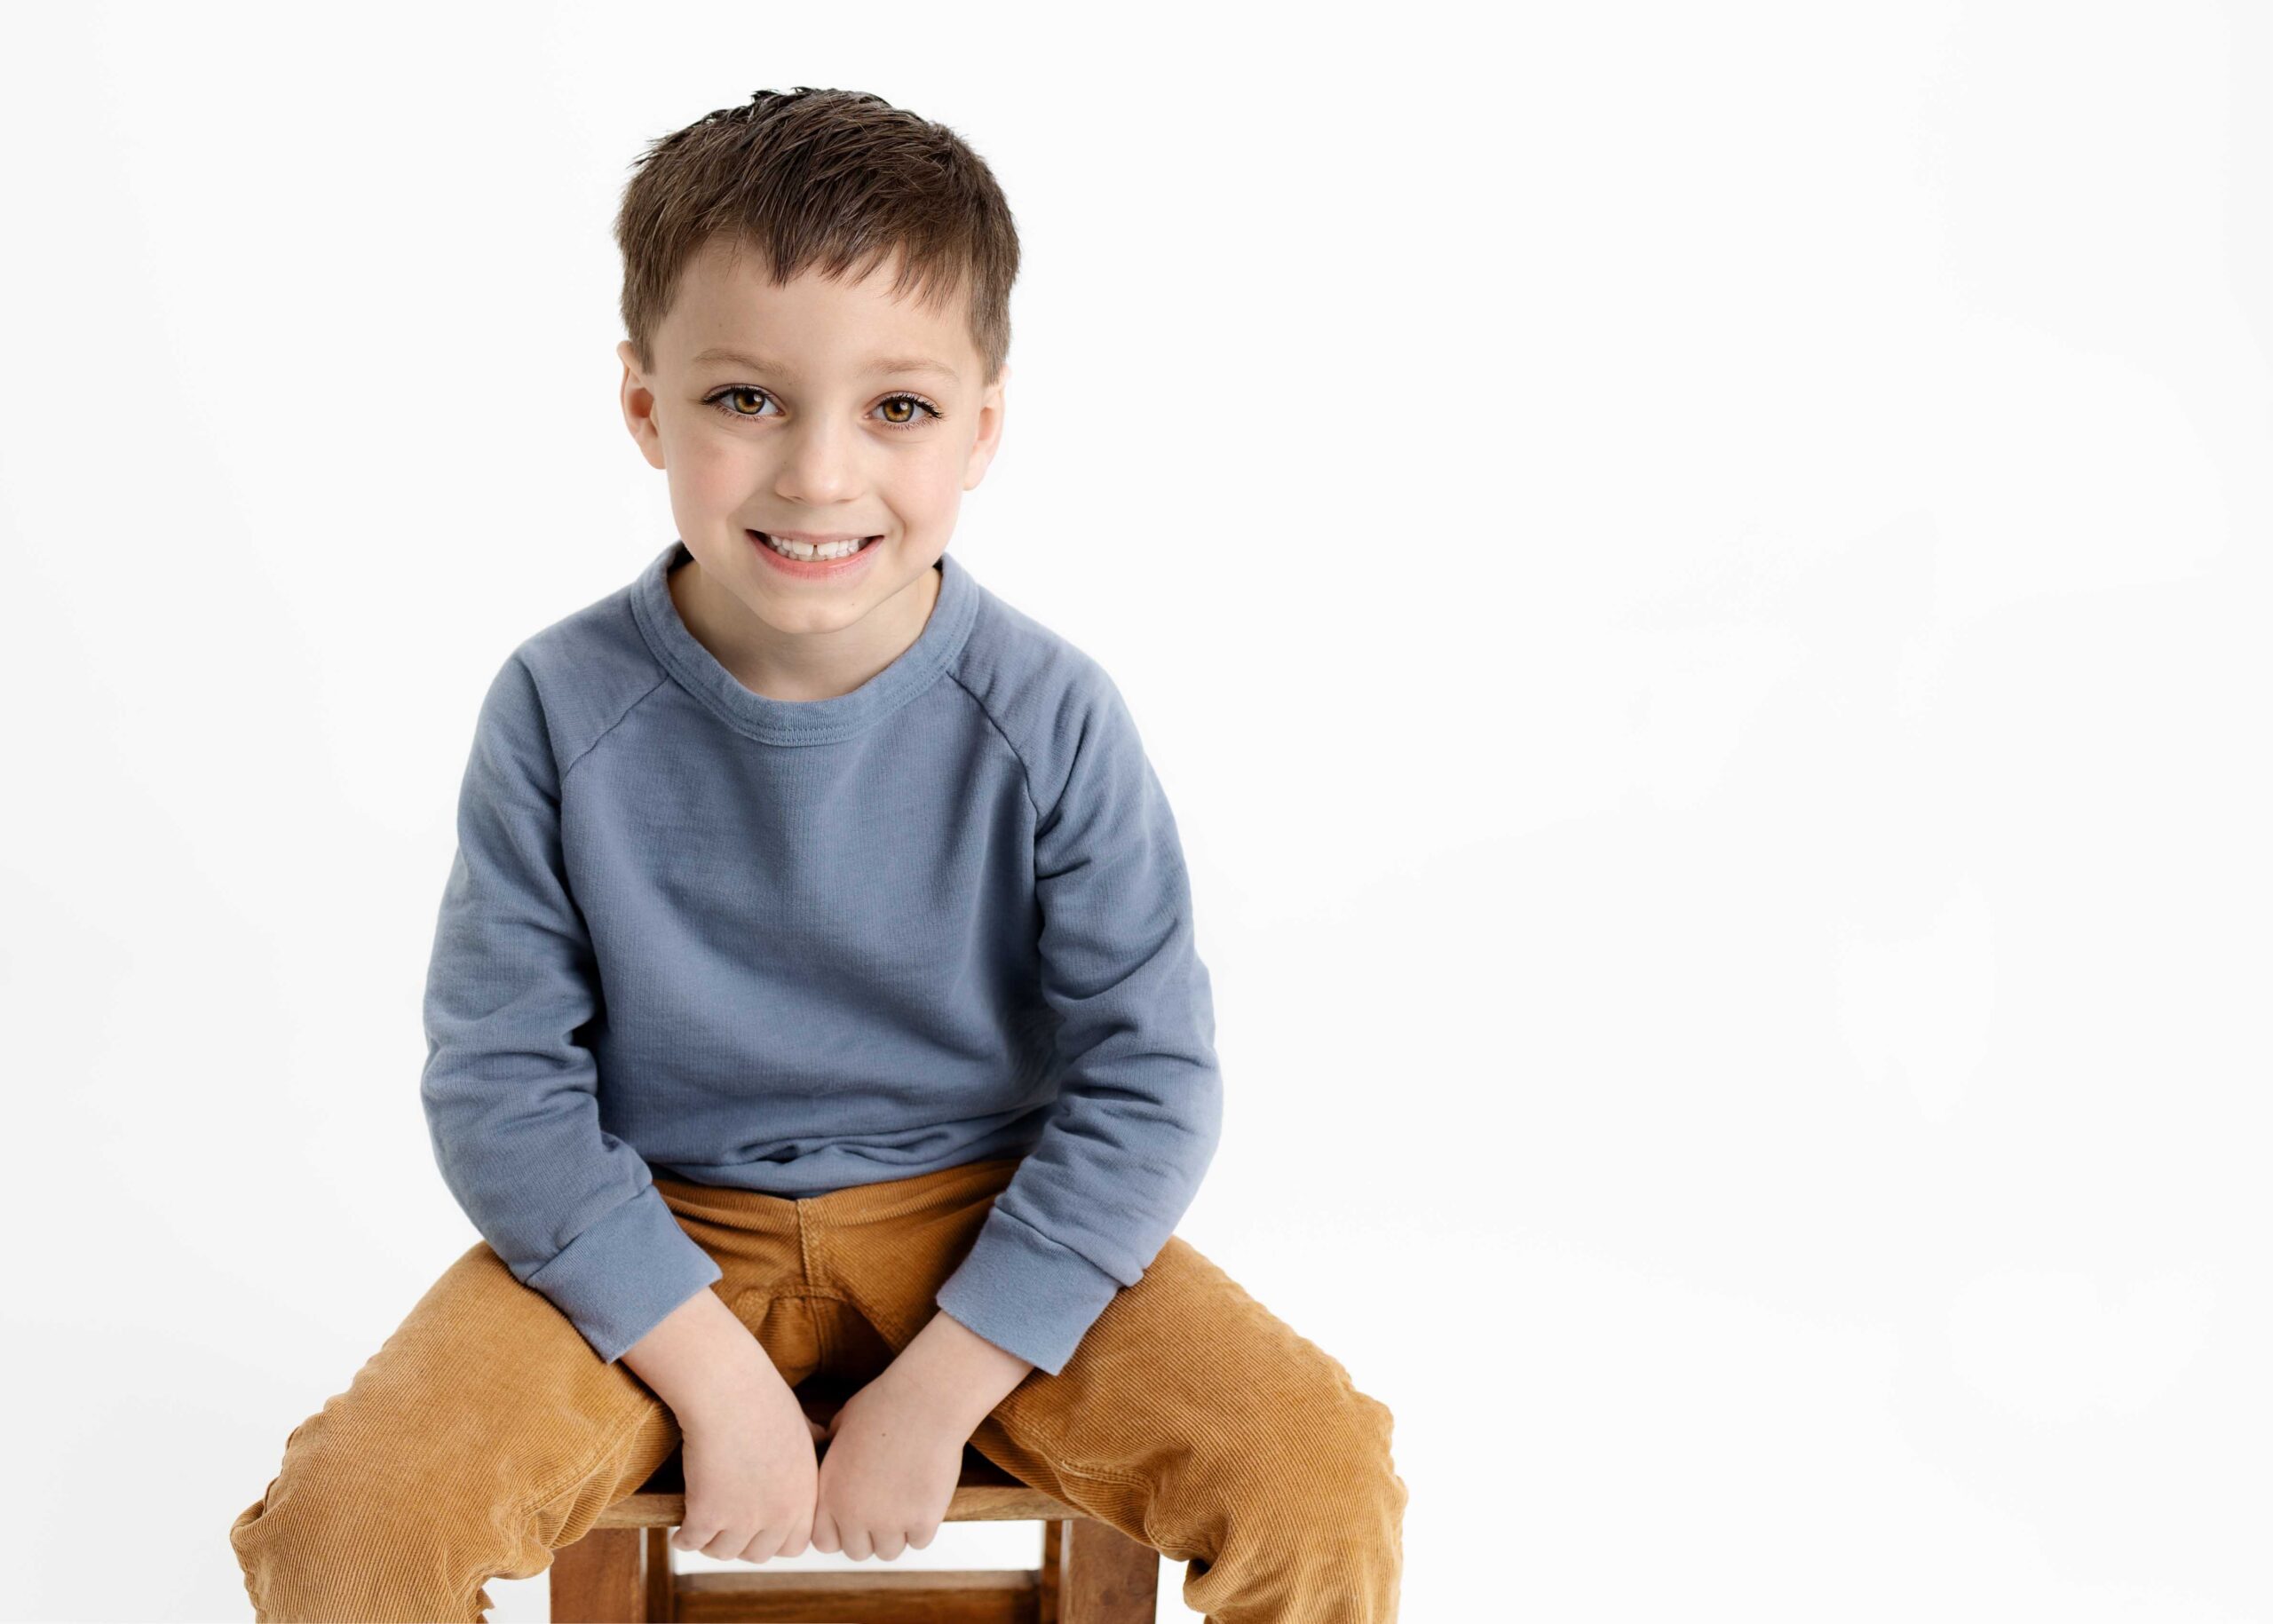 little boy sitting on stool smiling confidently at the camera